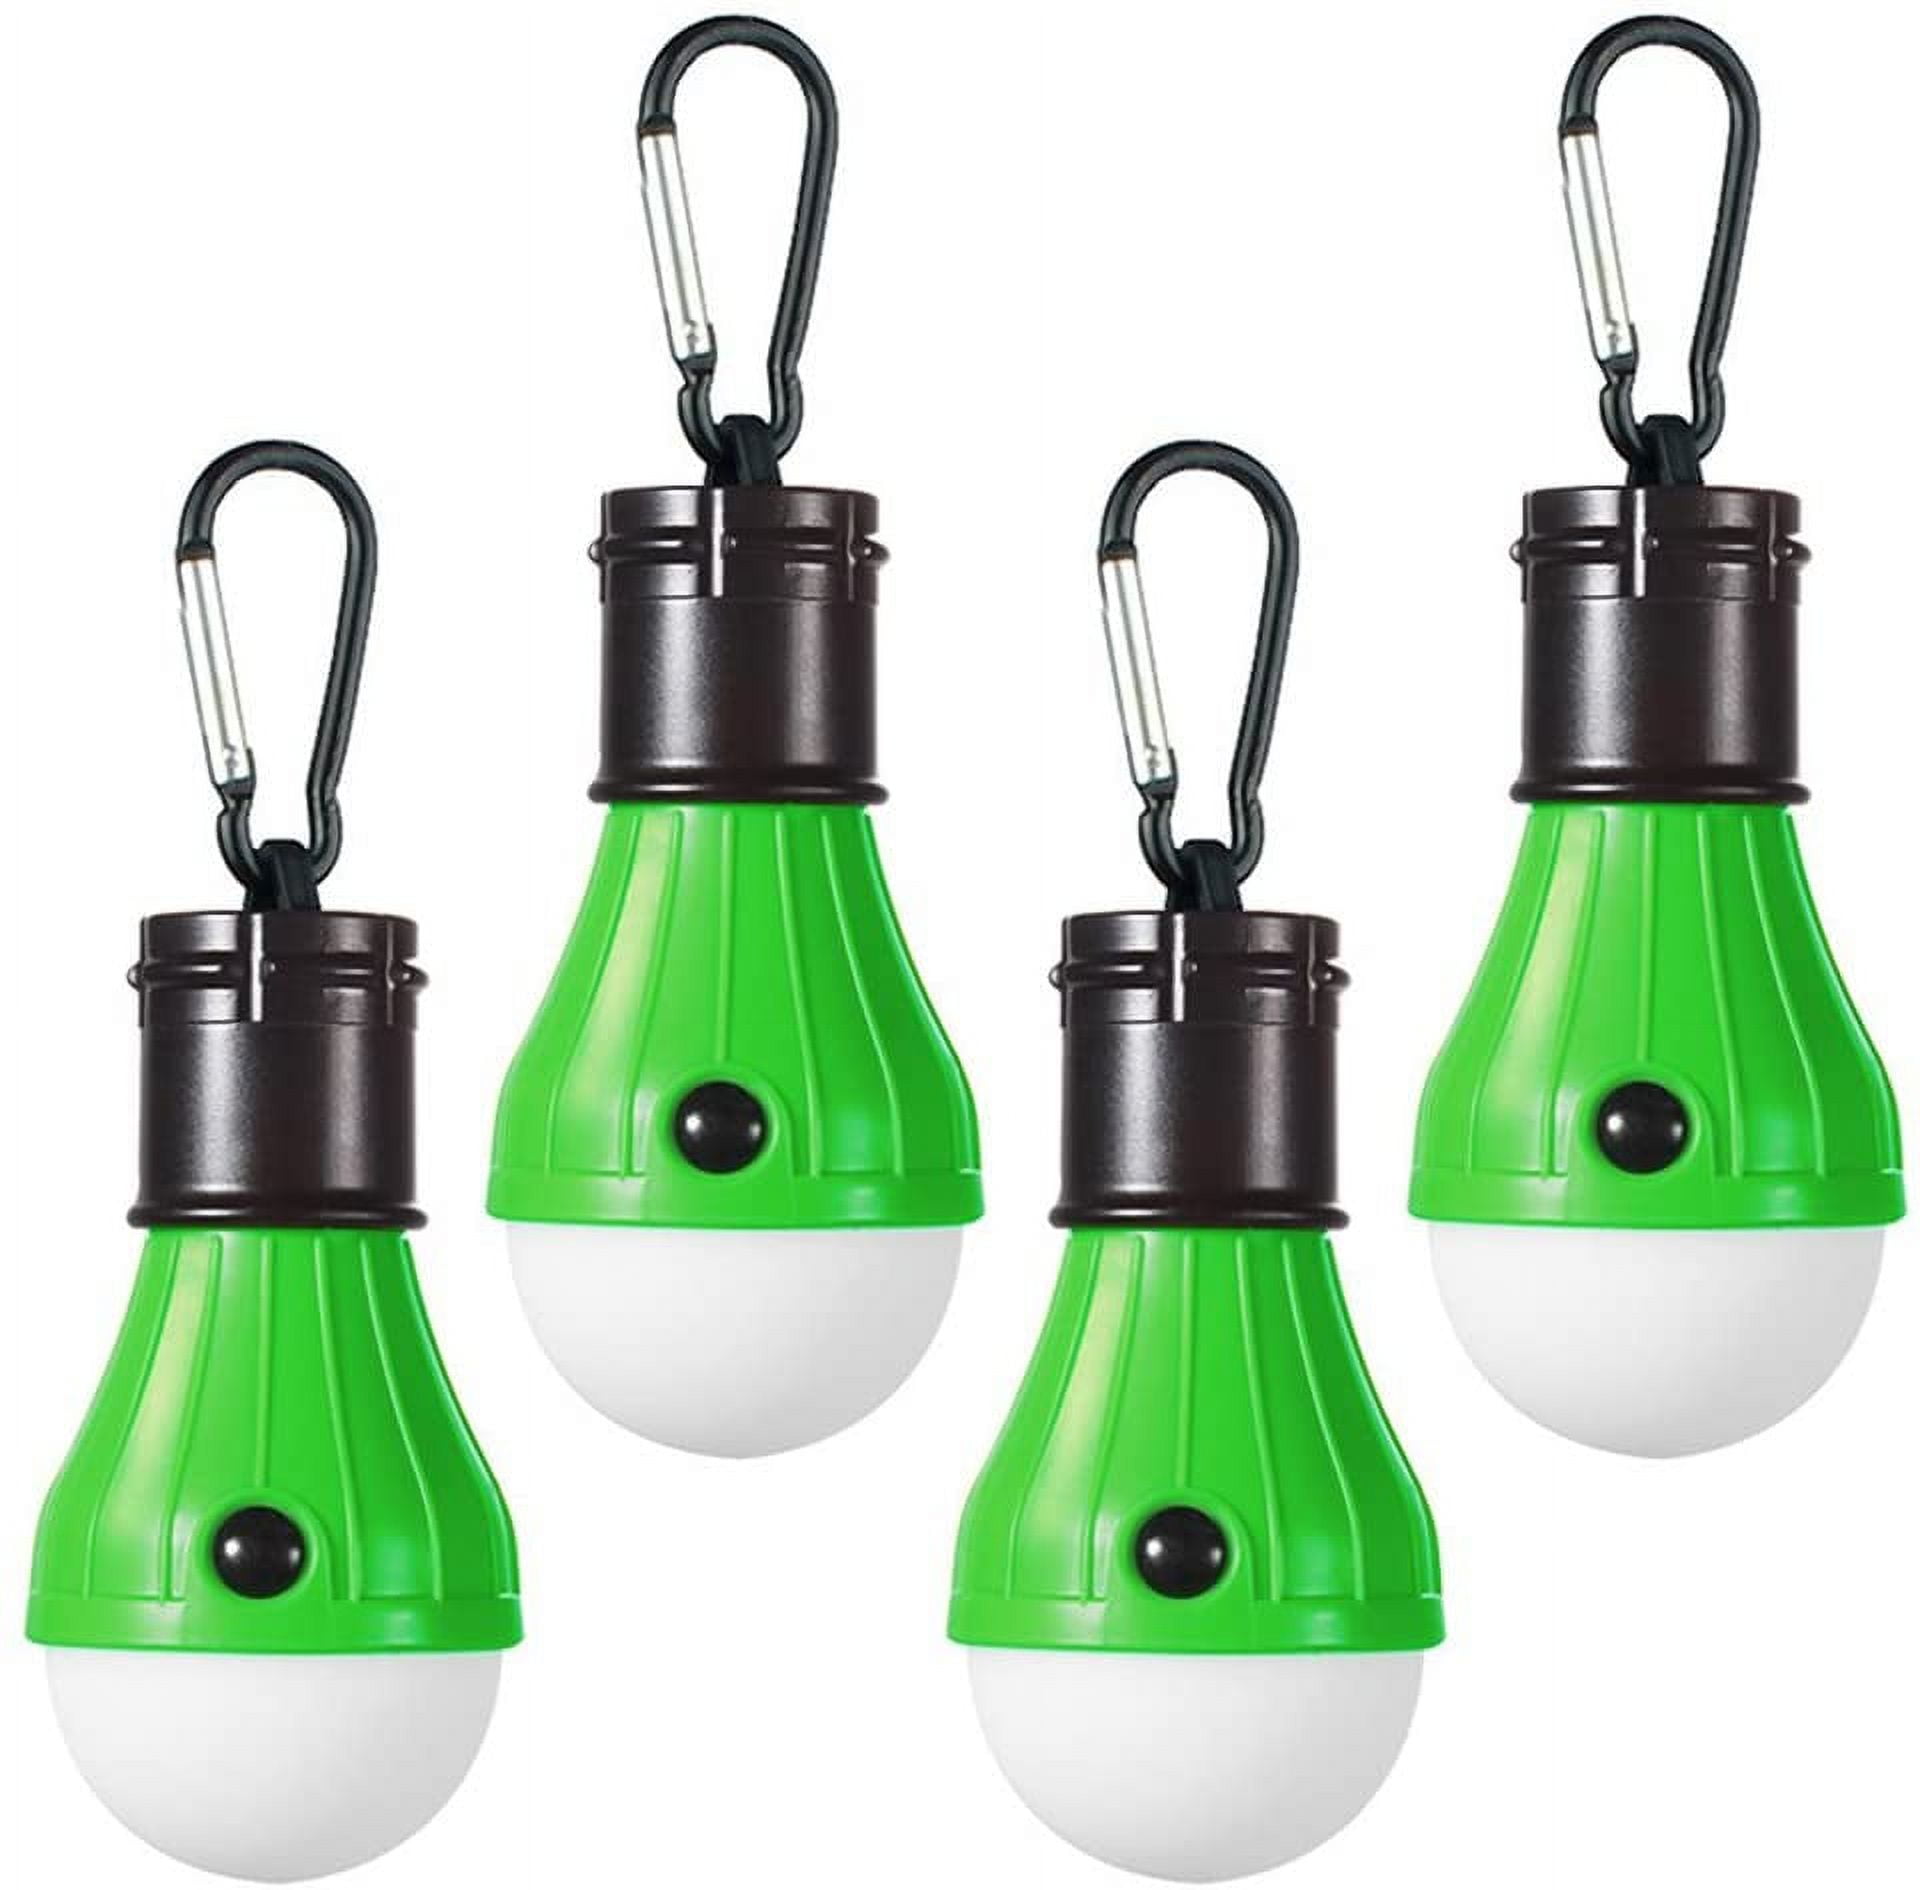 Lichamp LED Lanterns, 4 Pack Pop Up Lanterns for Power Outages, Bright  Battery Powered Hanging Lanterns for Outdoor Camping Hiking, Eme